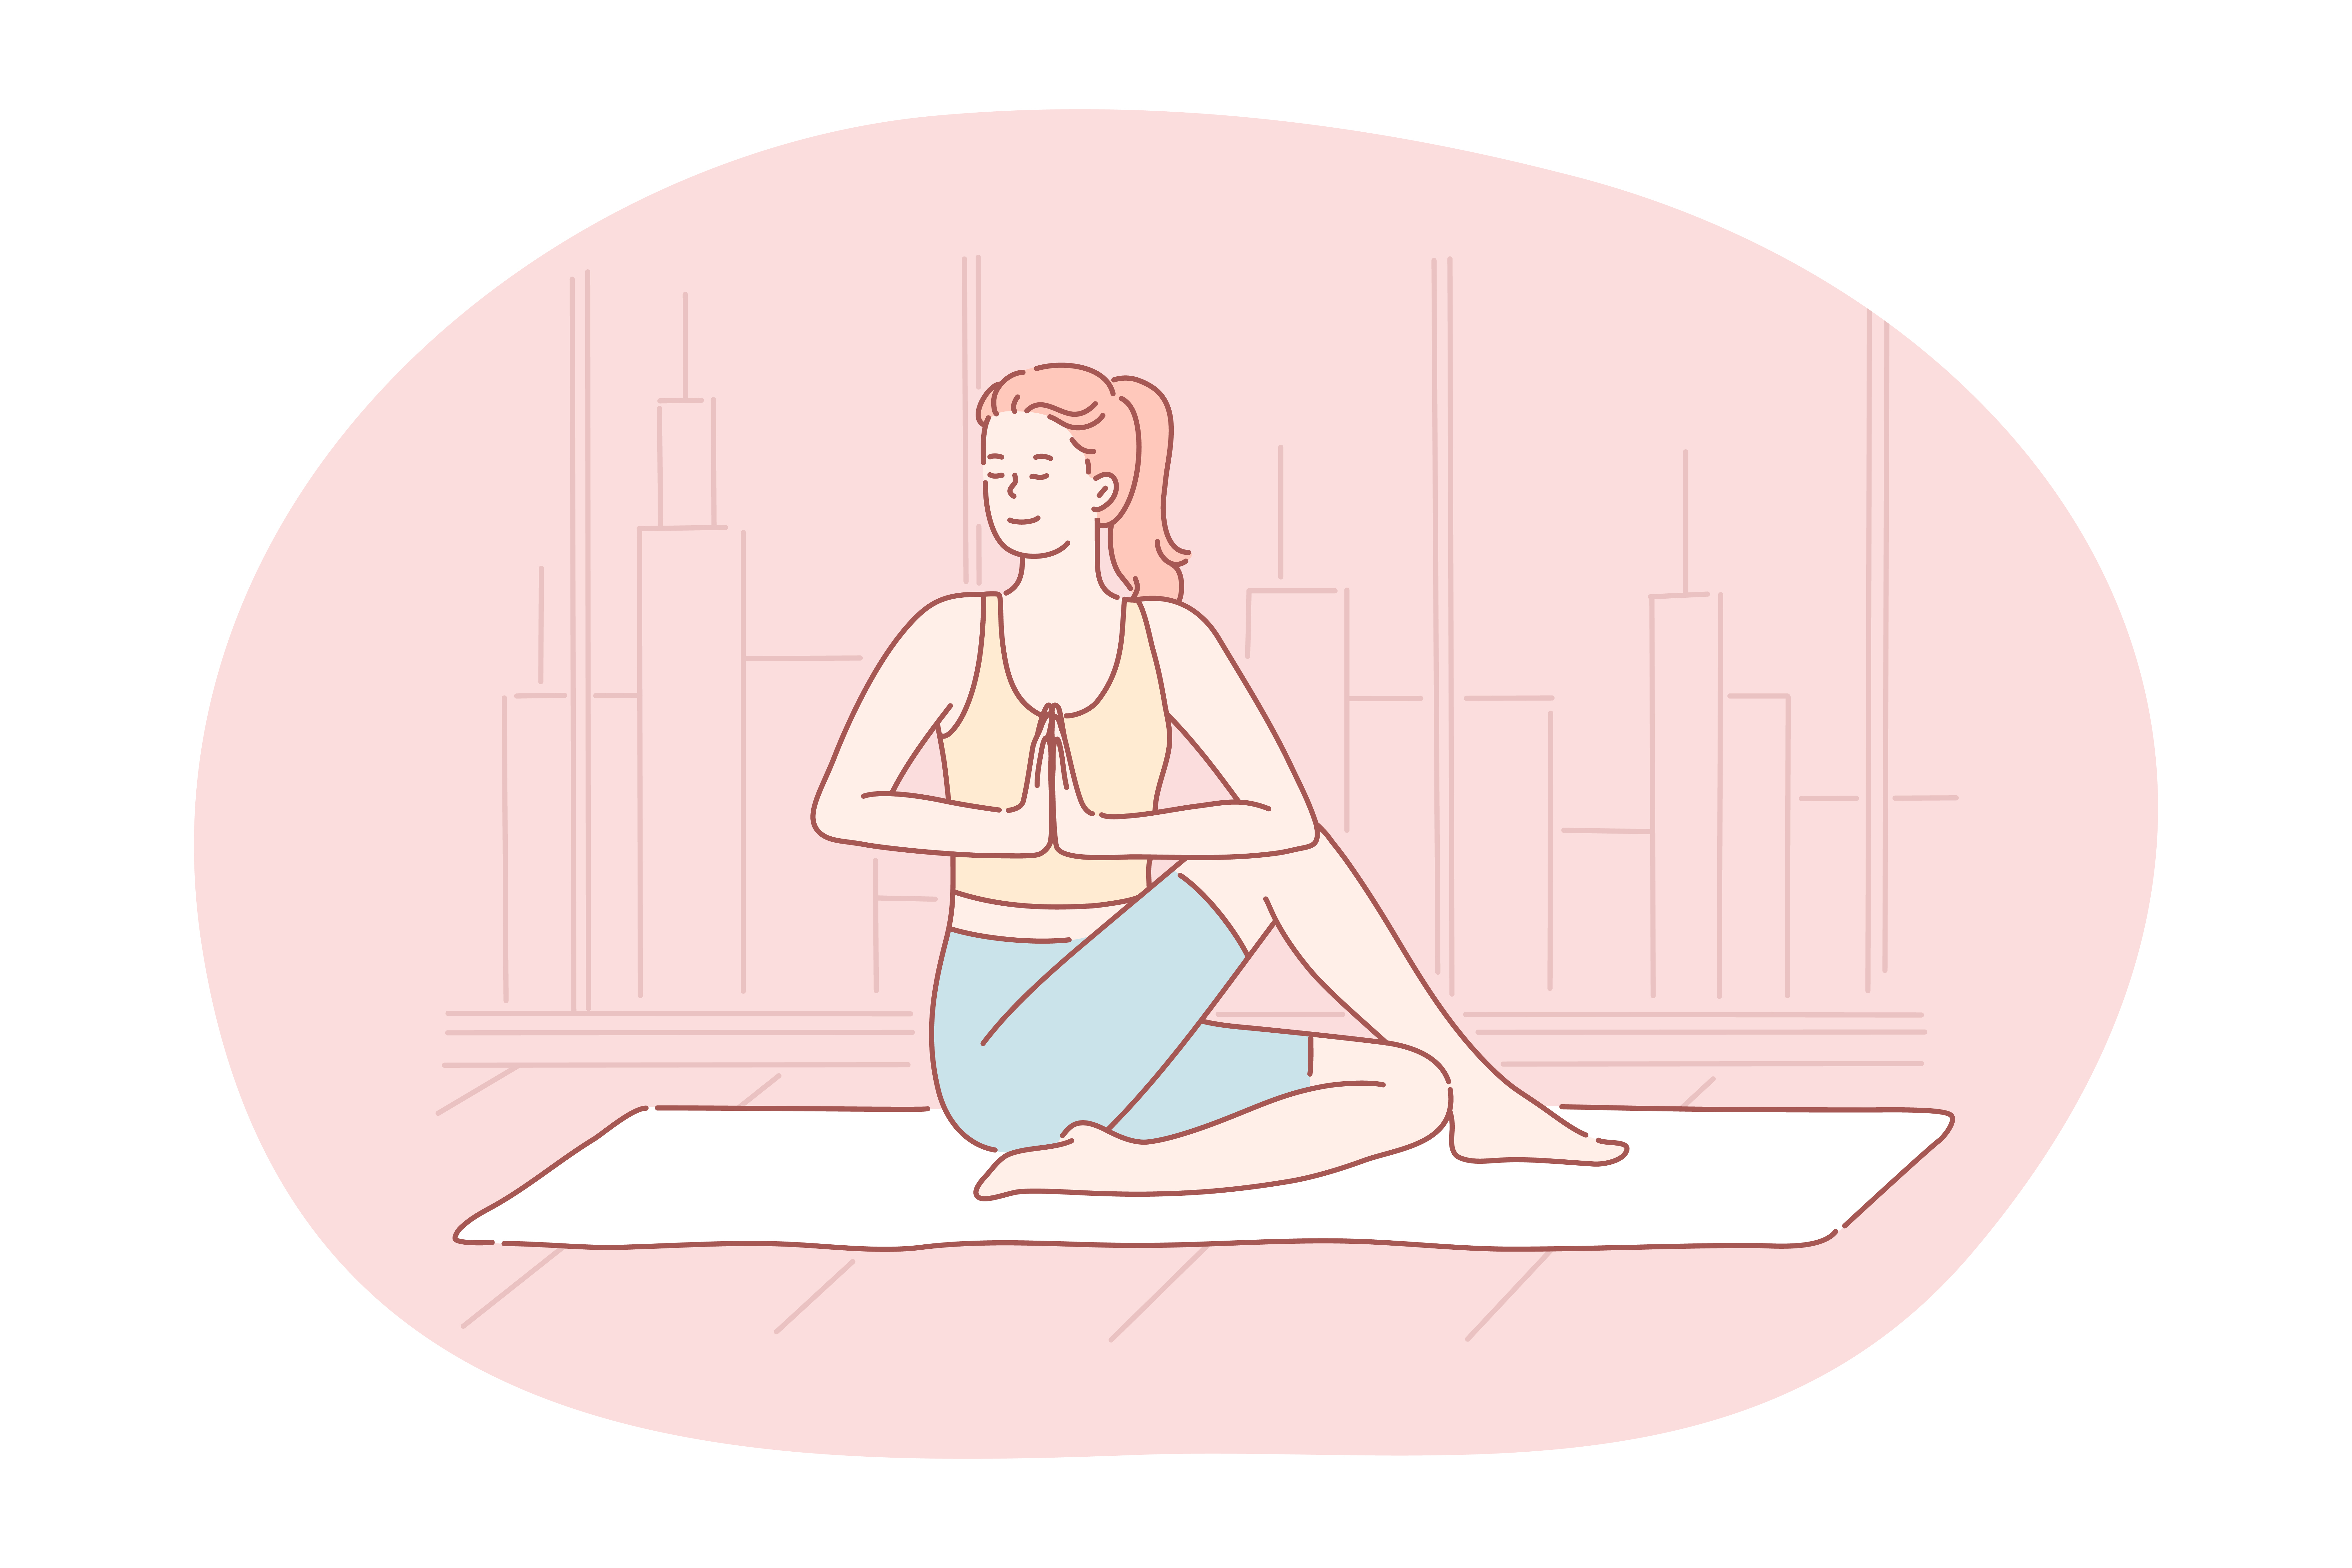 Yoga, meditation, healthy active sport lifestyle concept. Young smiling woman in sportswear sitting in asana on fitness mat, practicing yoga, relaxing and meditating. Fitness, relax, harmony, peace. Yoga, meditation, healthy active sport lifestyle concept